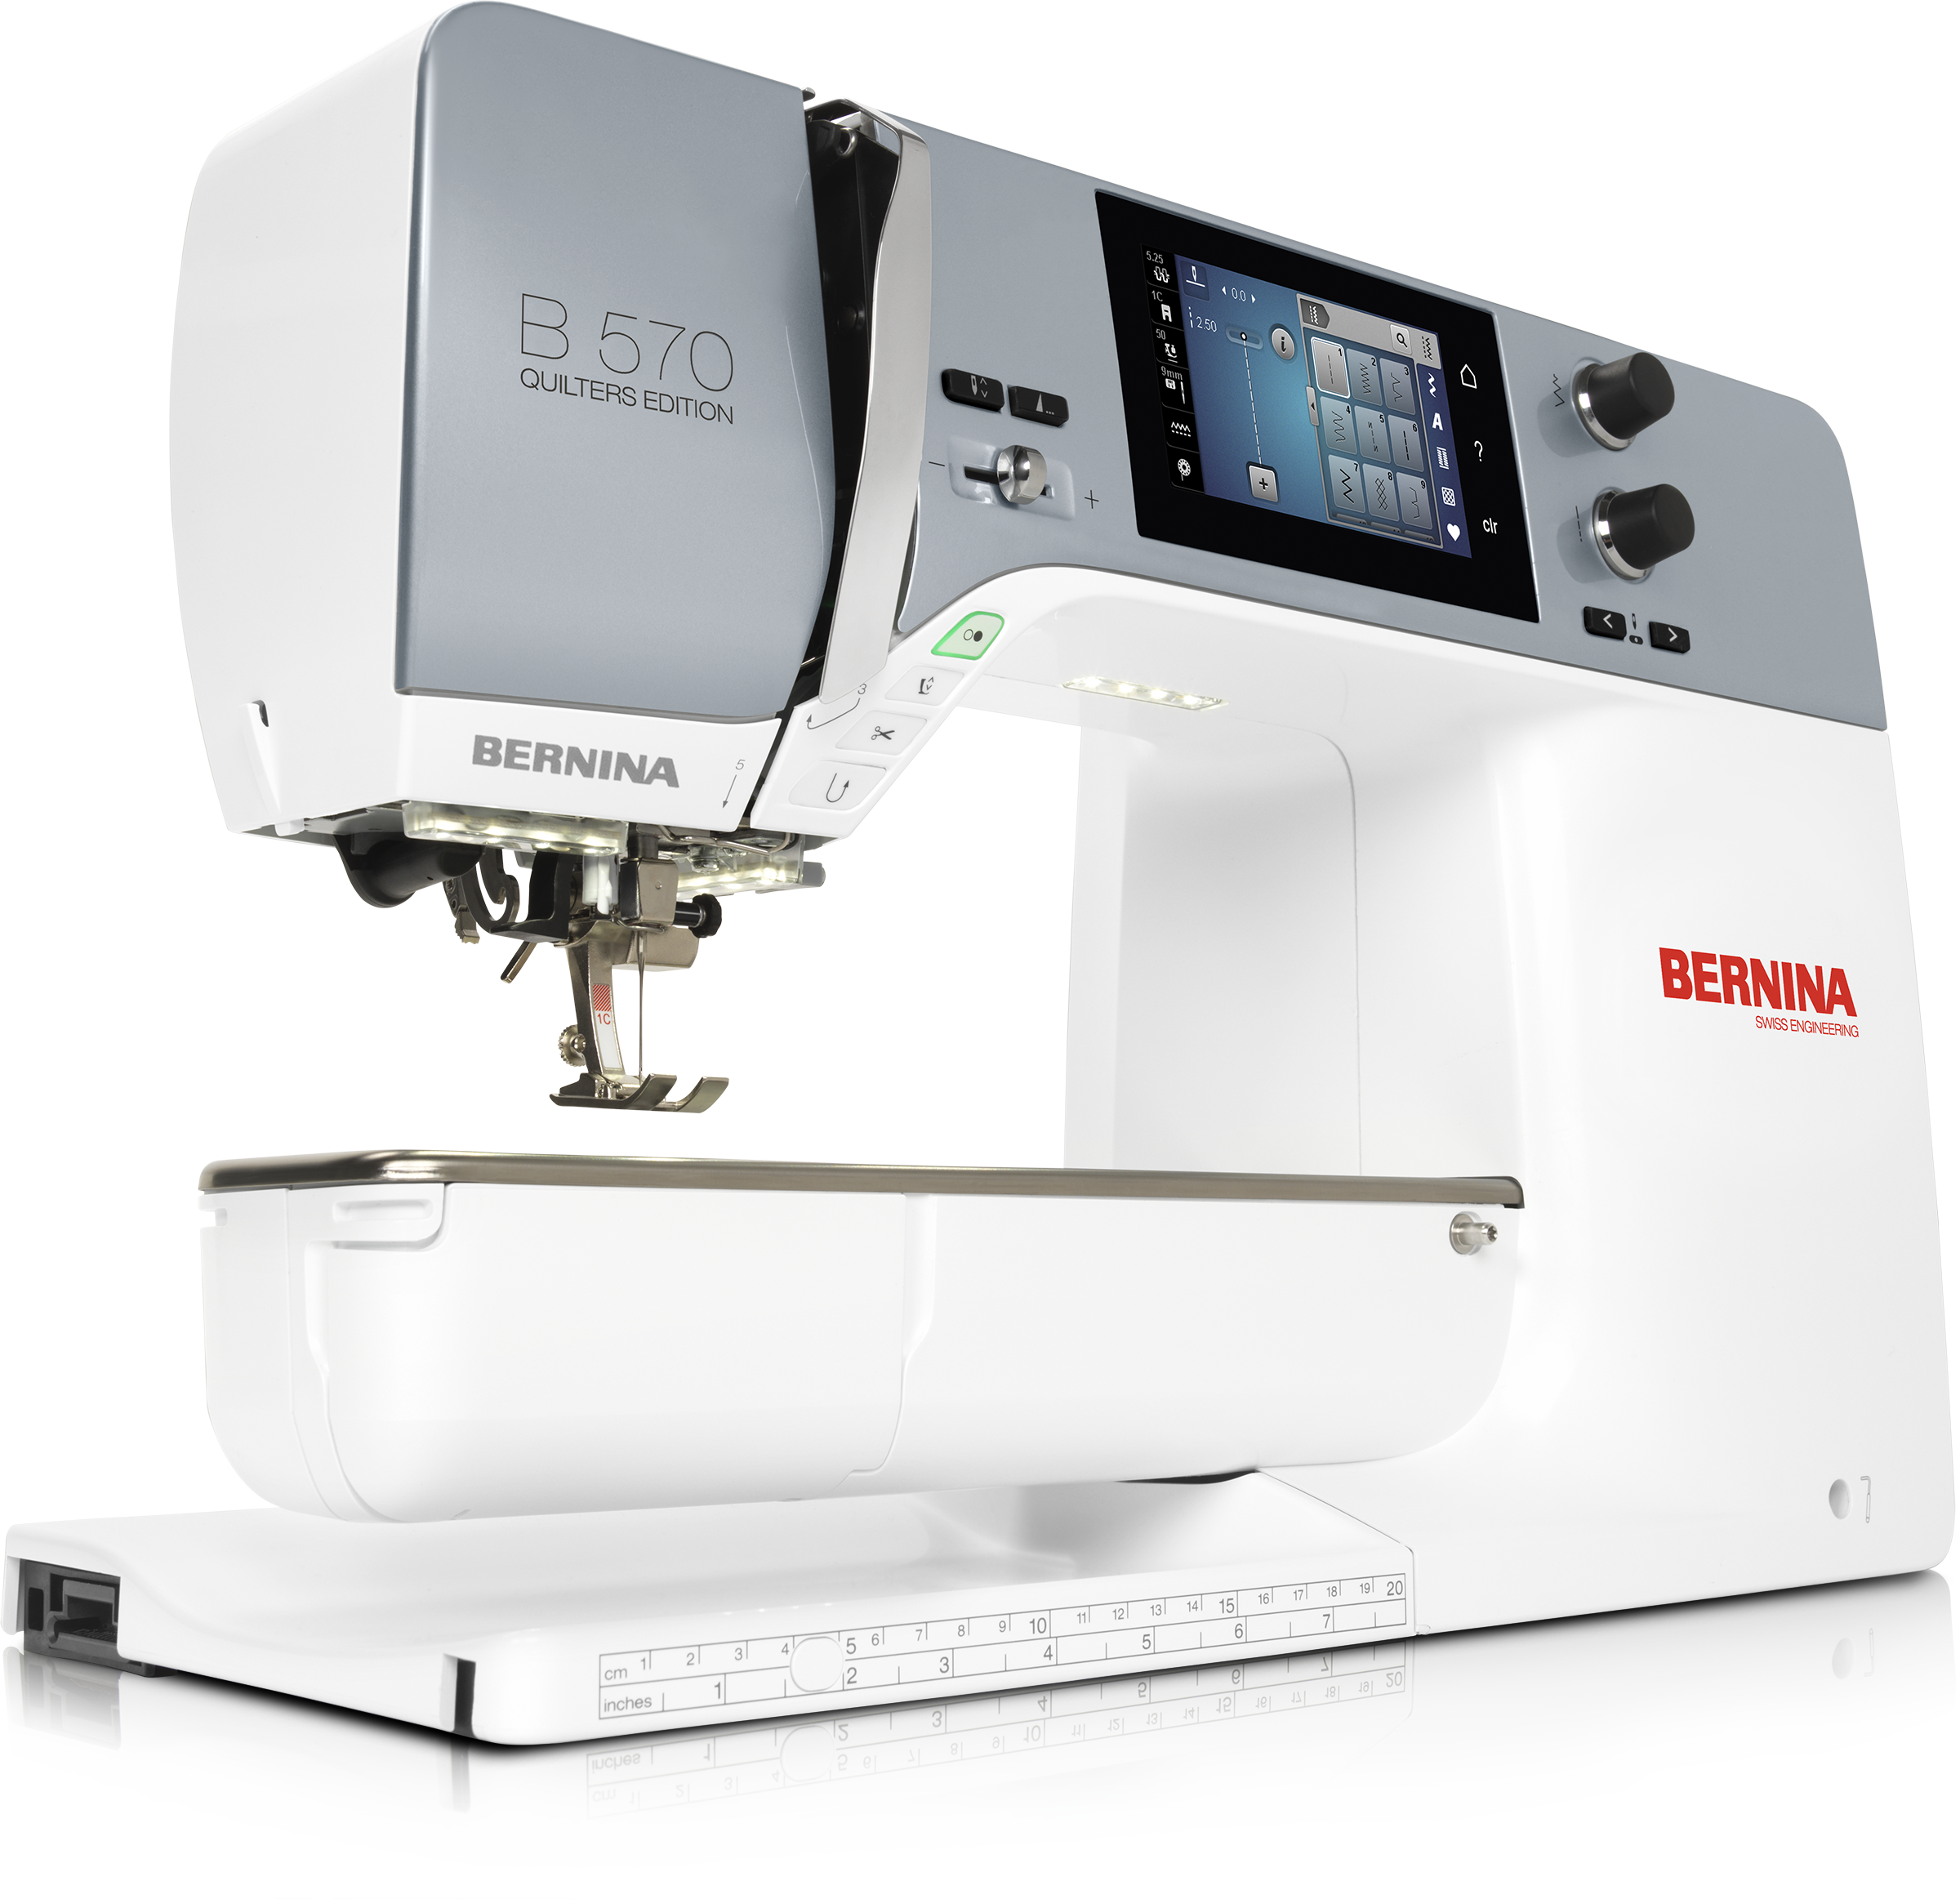 BERNINA 570 Quilter's Edition Sewing and Embroidery Machine